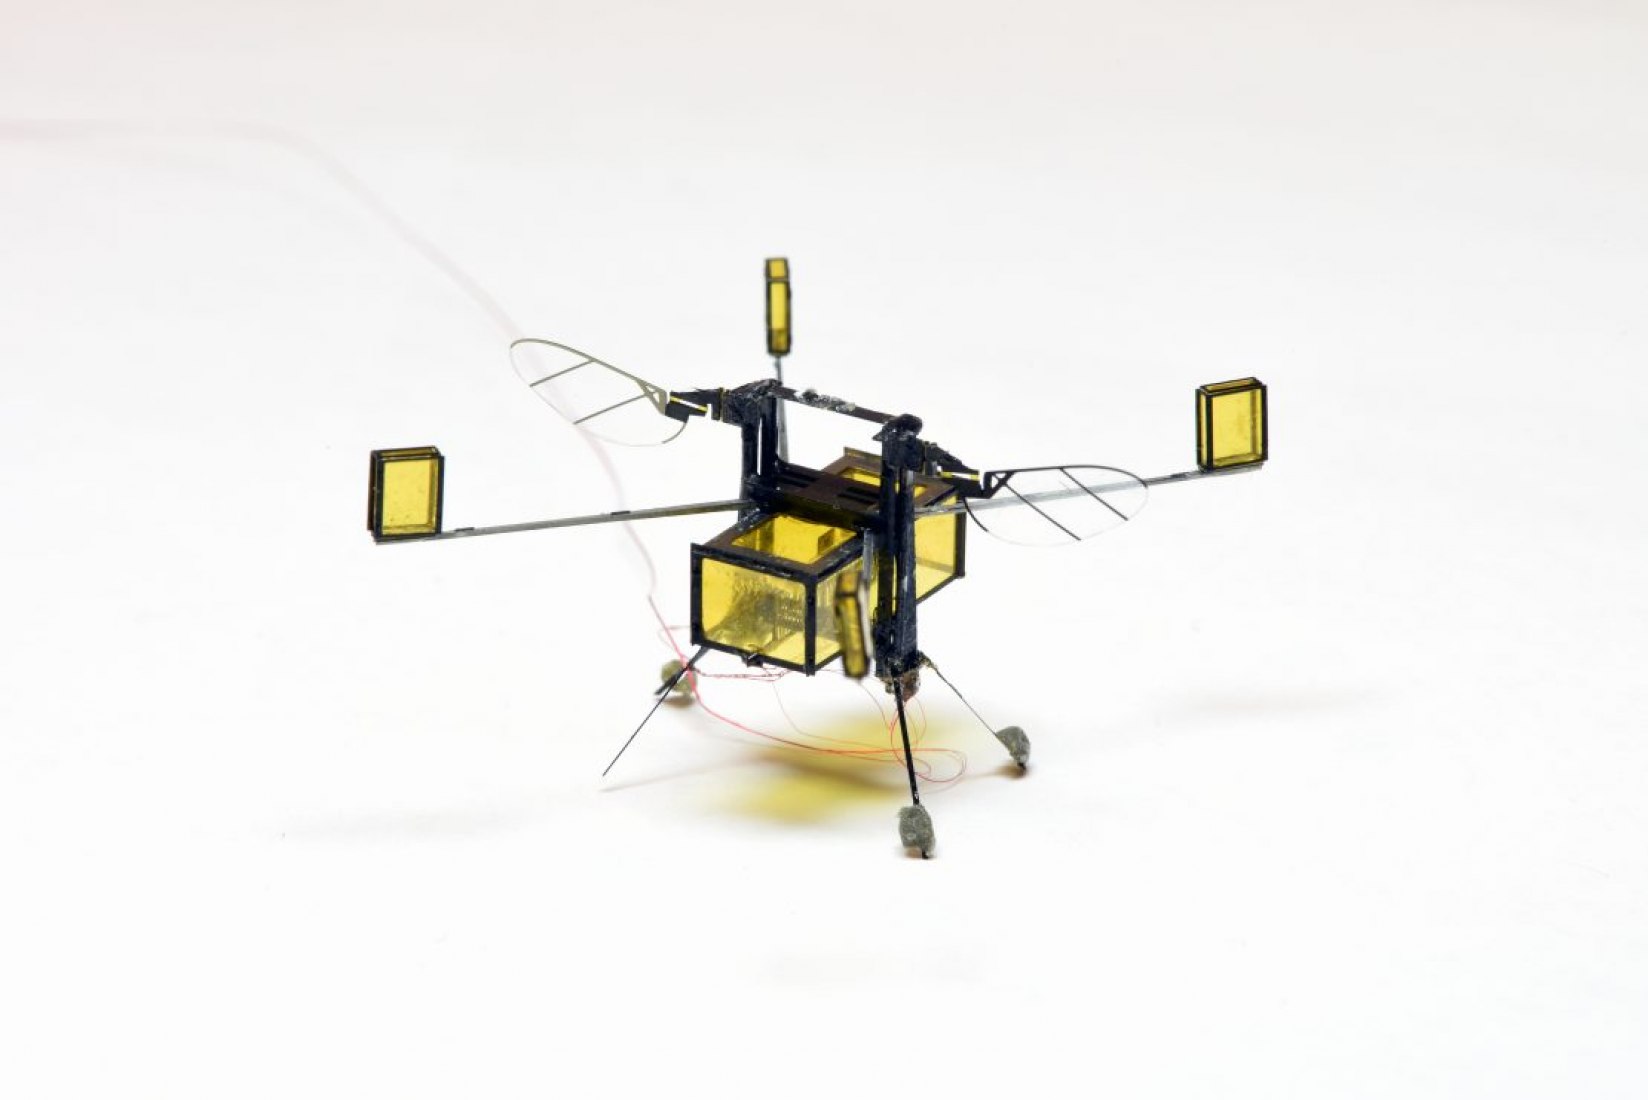 New, hybrid RoboBee can fly, dive into water, swim, propel itself back out of water, and safely land. The RoboBee is retrofitted with four buoyant and a central gas collection chamber. Once the RoboBee swims to the surface, an electrolytic plate in the chamber converts water into oxyhydrogen, a combustible gas fuel. Image courtesy of Wyss Institute at Harvard University